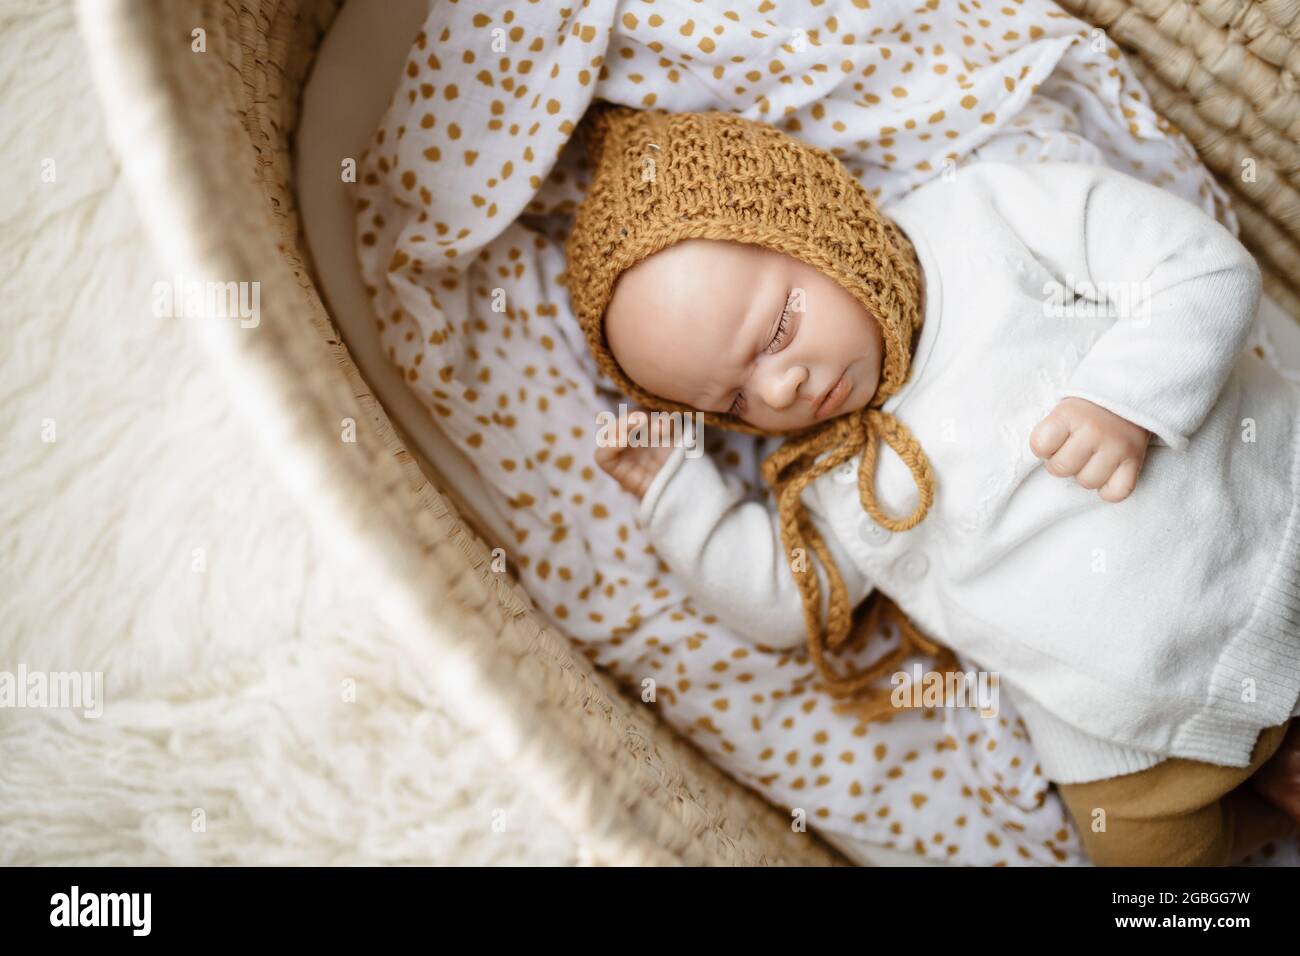 A reborn newborn baby doll toy dressed in a mustard colored bonnet hat and a white cardigan lying in a cream moses basket bassinet Stock Photo